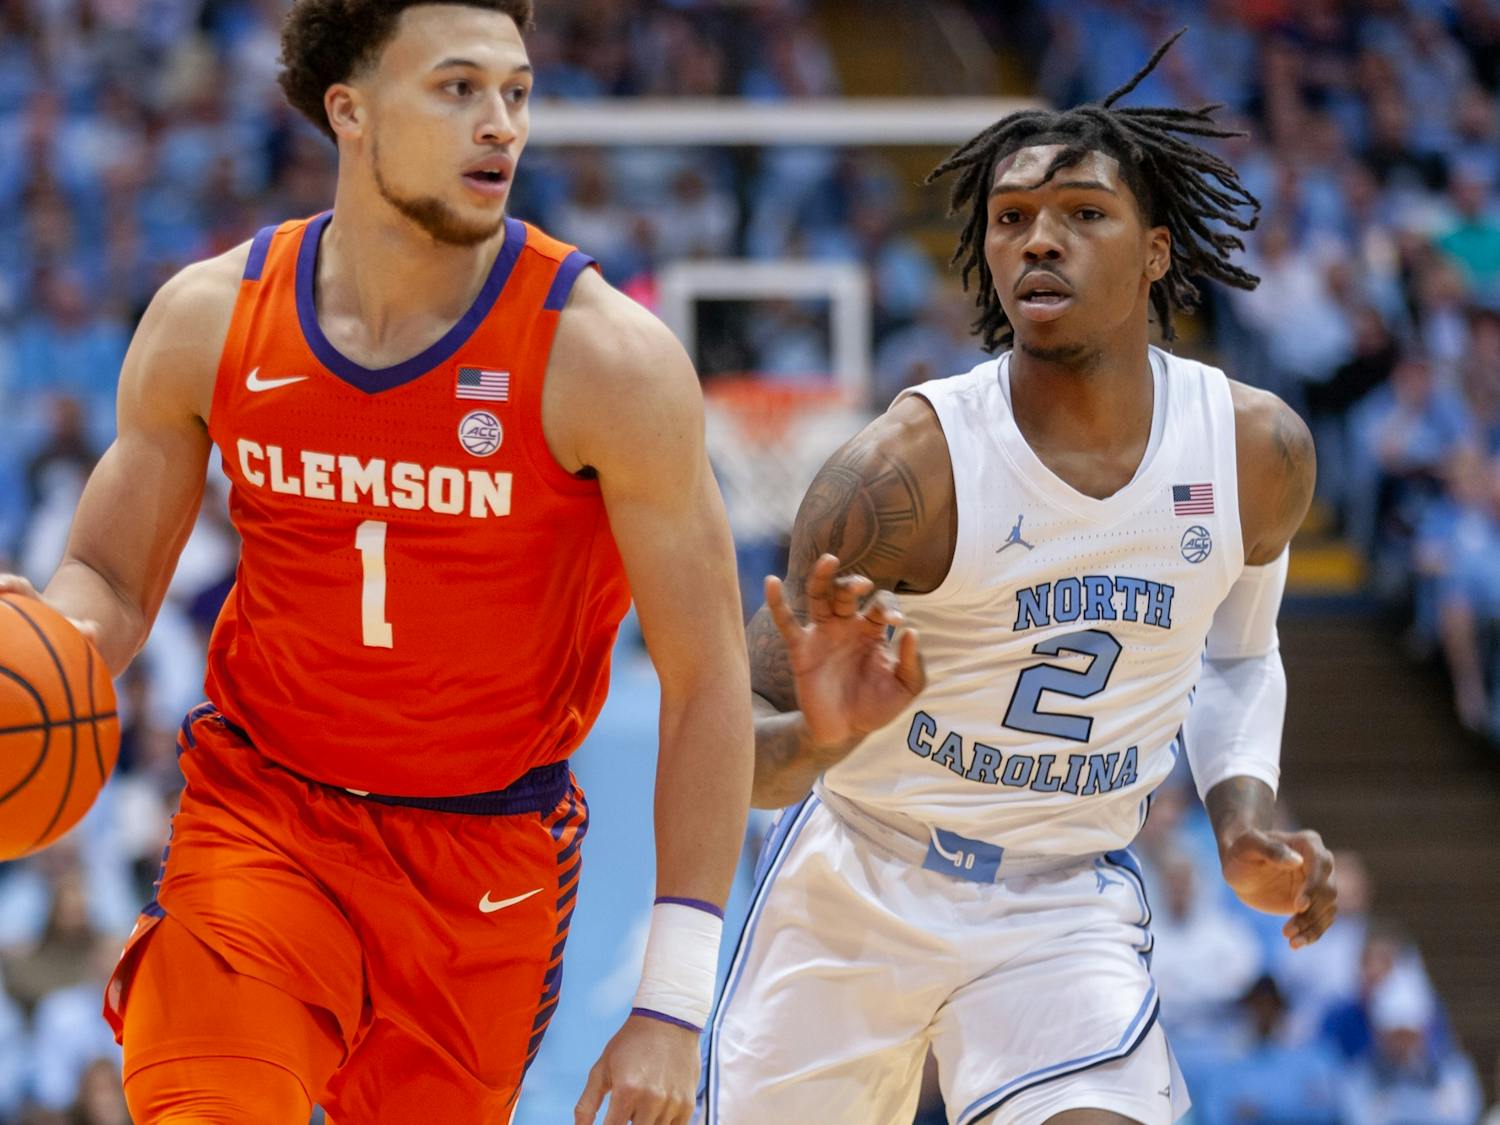 UNC junior guard Caleb Love (2) watches Clemson junior guard Chase Hunter (1) as he runs down the court during the men's basketball game against Clemson at the Dean E. Smith Center on Saturday, Feb. 11, 2023. UNC beat Clemson 91-71.